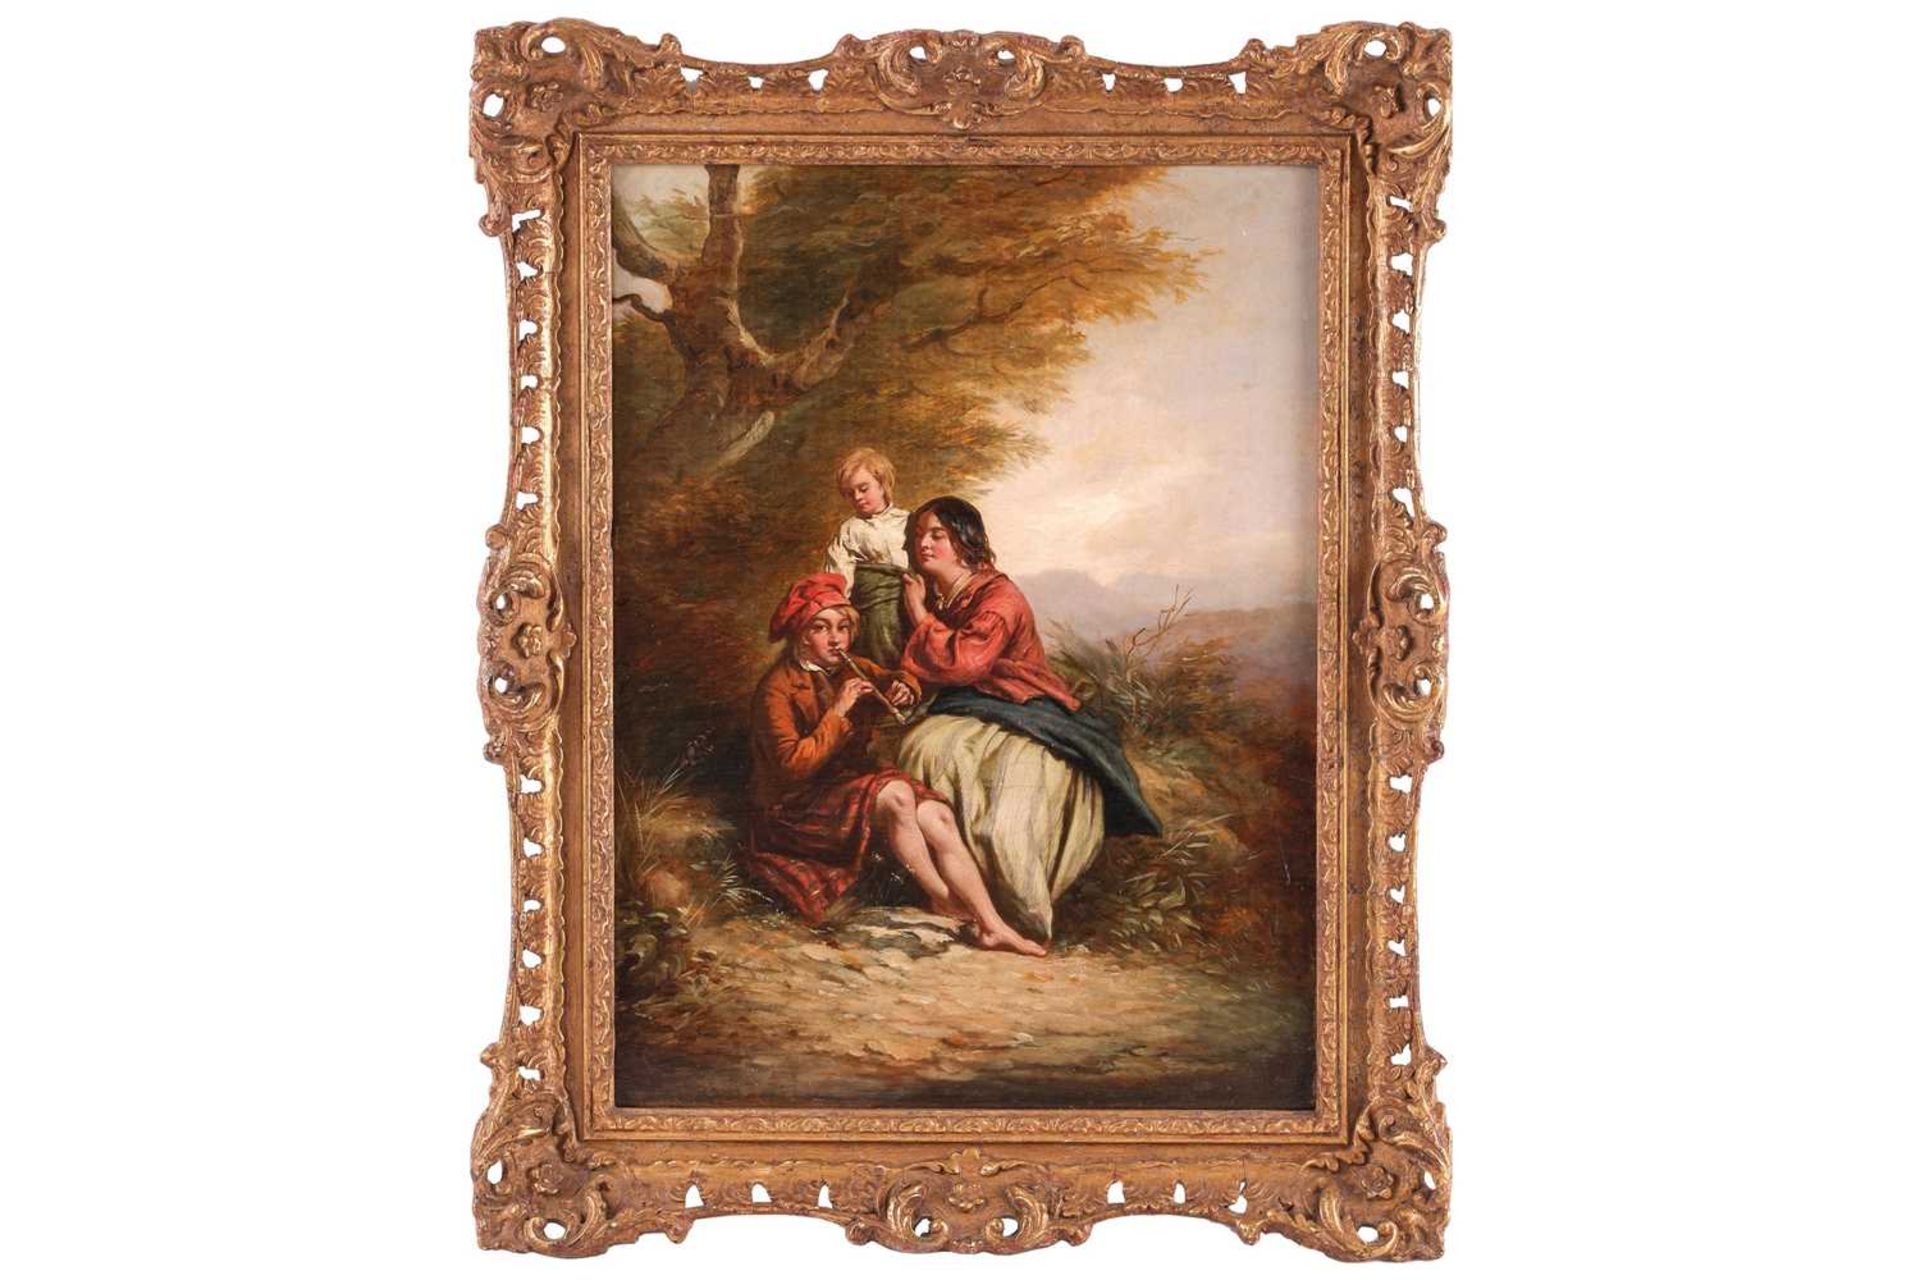 19th Century British School, Highland family seated below a tree, unsigned, oil on canvas, 40.5 x